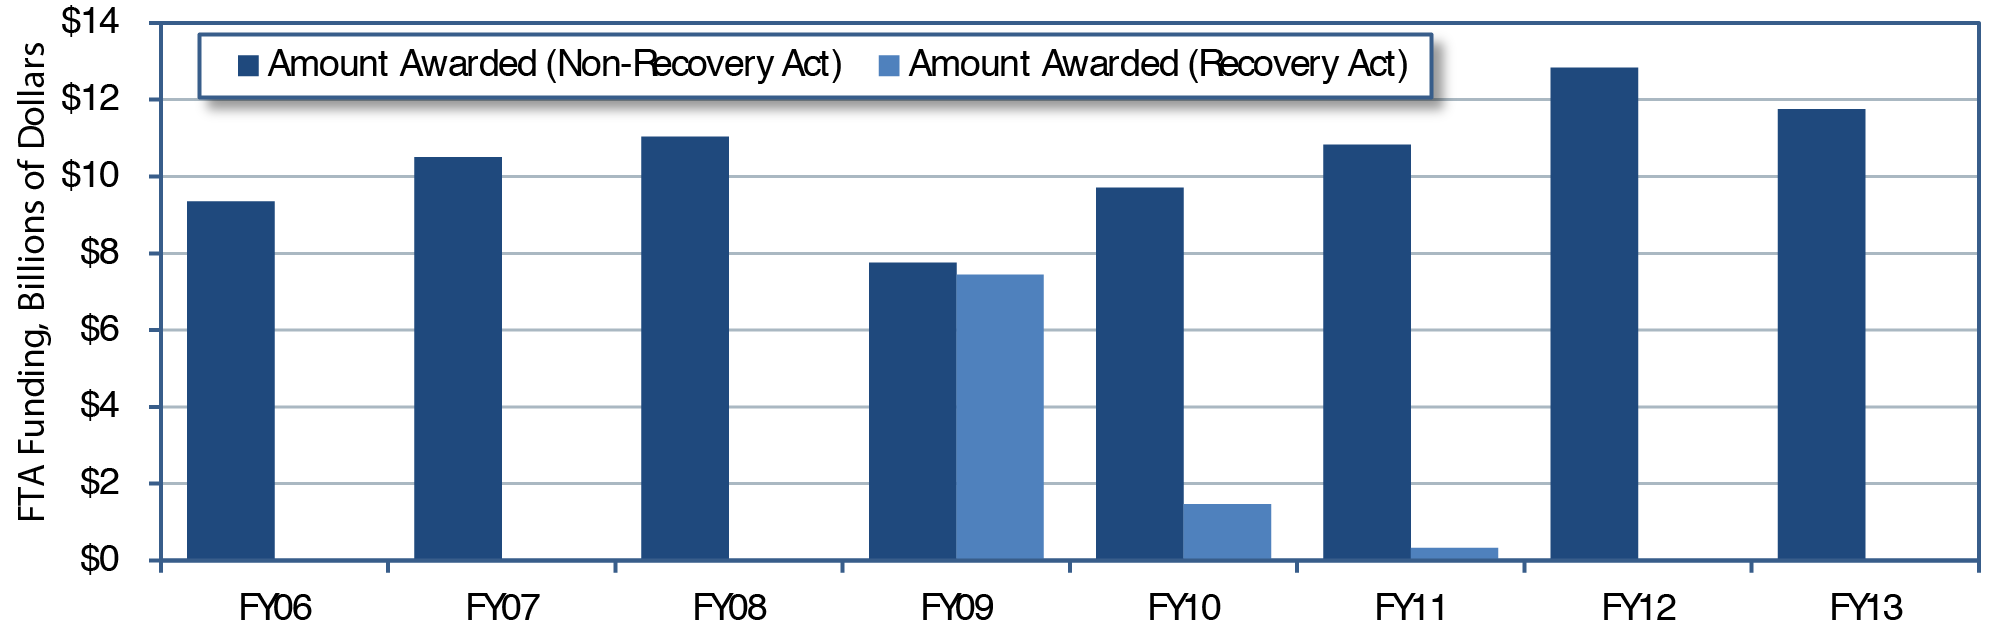 A bar chart plots values in billions of dollars for two funding categories for the fiscal years 2006 through 2013. The award for non-recovery act funding has an initial value of 9.4 billion dollars for the fiscal year 2006 and trends upward to a value of 11.0 billion dollars for the fiscal year 2008. In fiscal year 2009, the award for non-recovery act funding dropped to 7.8 billion dollars, and the award for recovery act funding was at 7.4 billion dollars. In fiscal year 2010, the awards were at 9.7 billion dollars for non-recovery act funding and 1.5 billion dollars for recovery act funding. In fiscal year 2011, the awards were at 10.8 billion dollars for non-recovery act funding and 0.3 billion dollars for recovery act funding. In fiscal year 2012, the awards reached 12.8 billion dollars for non-recovery act funding and dropped to zero for recovery act funding. In fiscal year 2013, the awards decreased to 11.8 billion dollars for non-recovery act funding and remained at zero for recovery act funding. Source: Federal Transit Administration, Grants Data. 